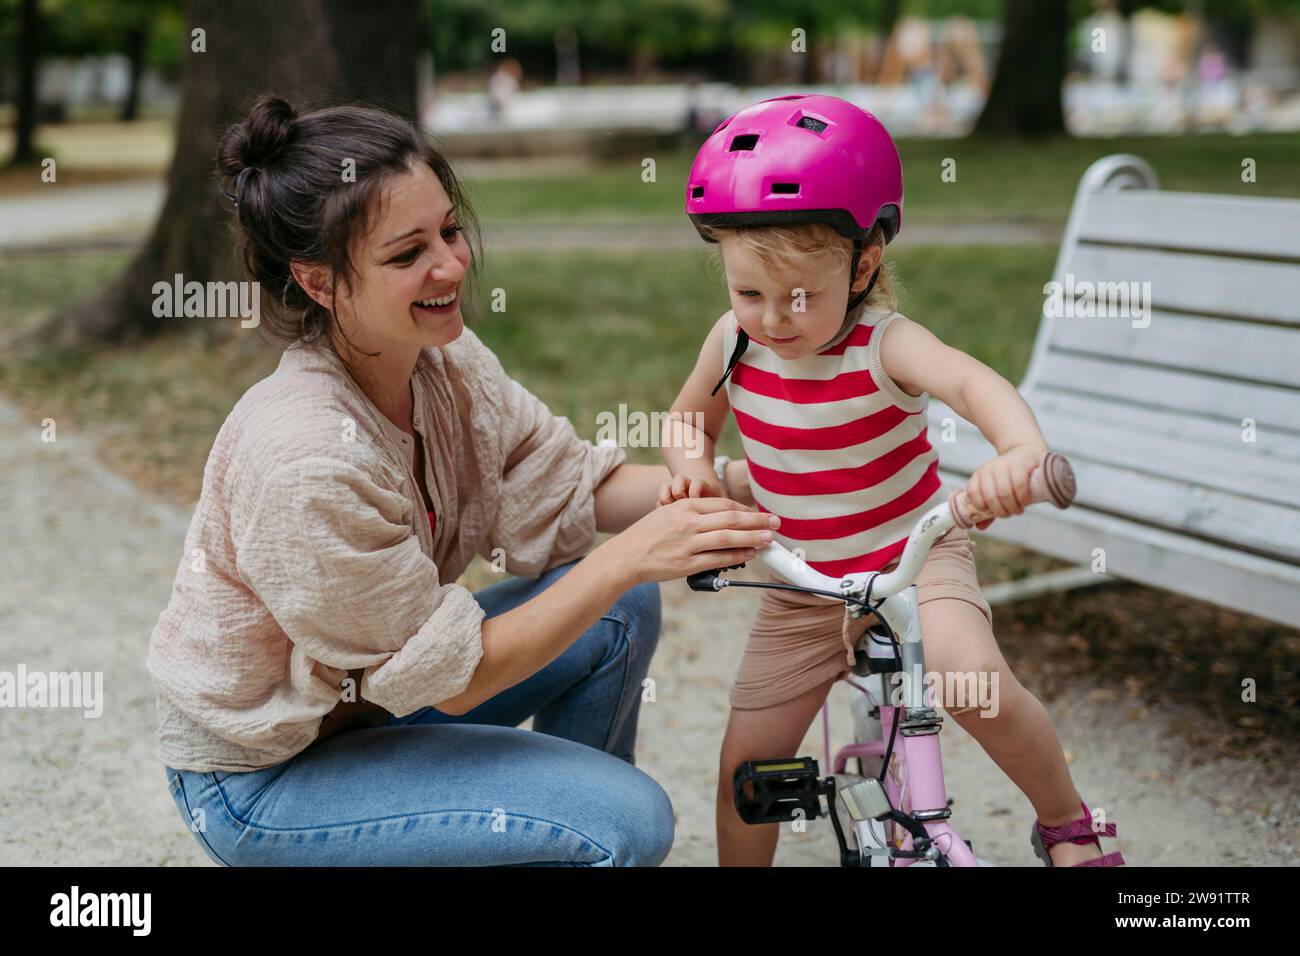 Mother putting safety helmet on little girl's head learning to ride a bike in the city park Stock Photo